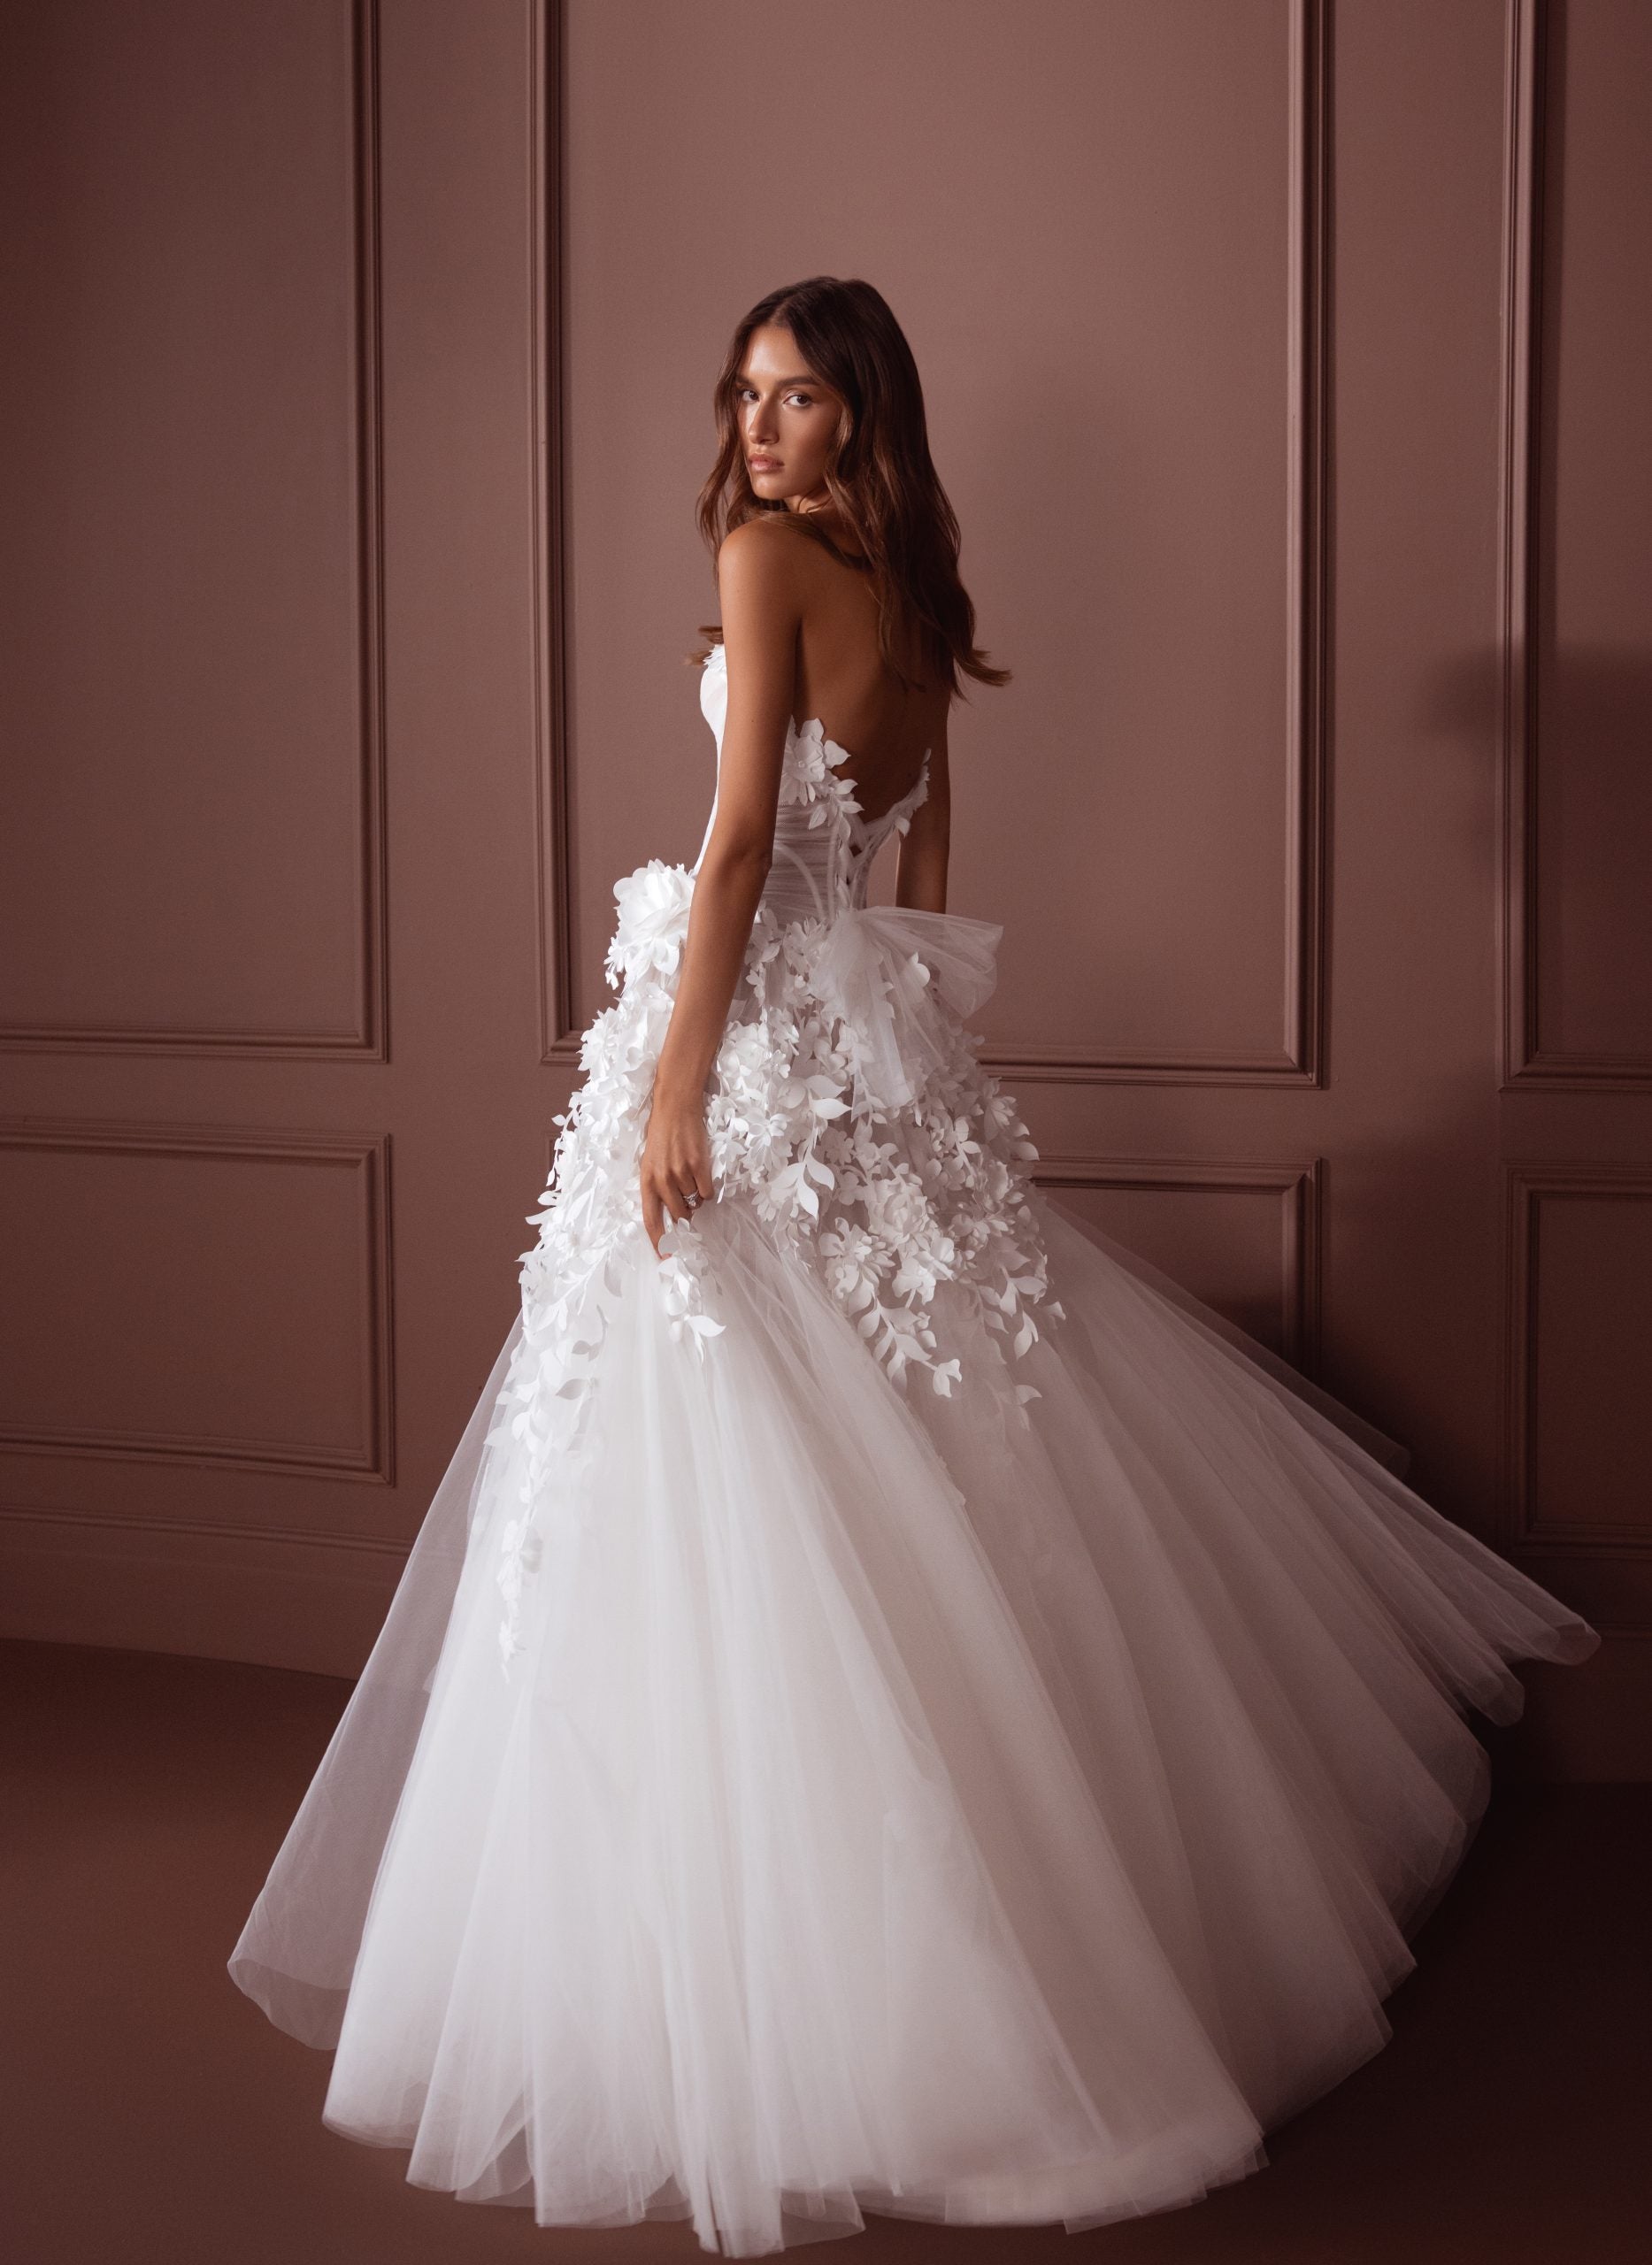 Strapless Floral Modified A-Line Gown by Pnina Tornai - Image 2